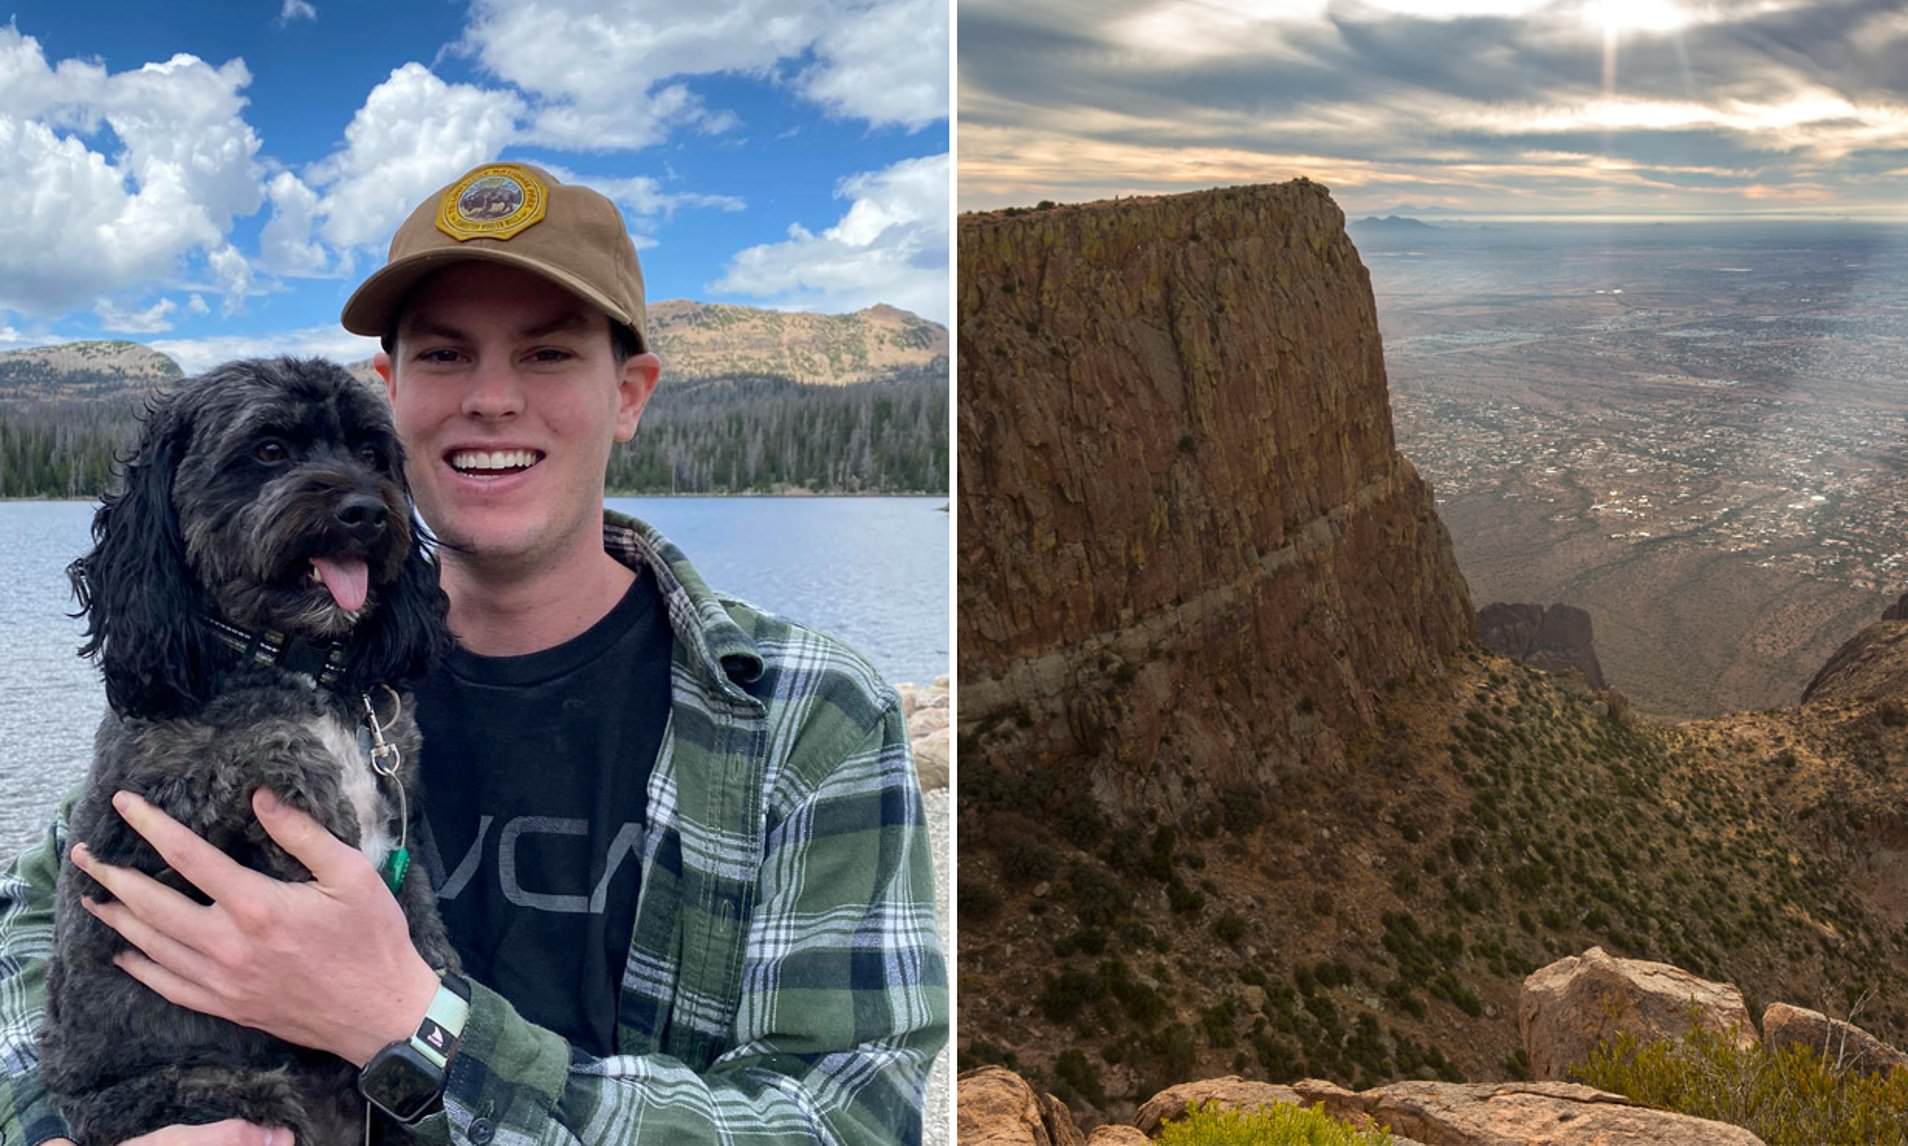 Hiker falls nearly 700 feet to his death attempting a selfie in Arizona